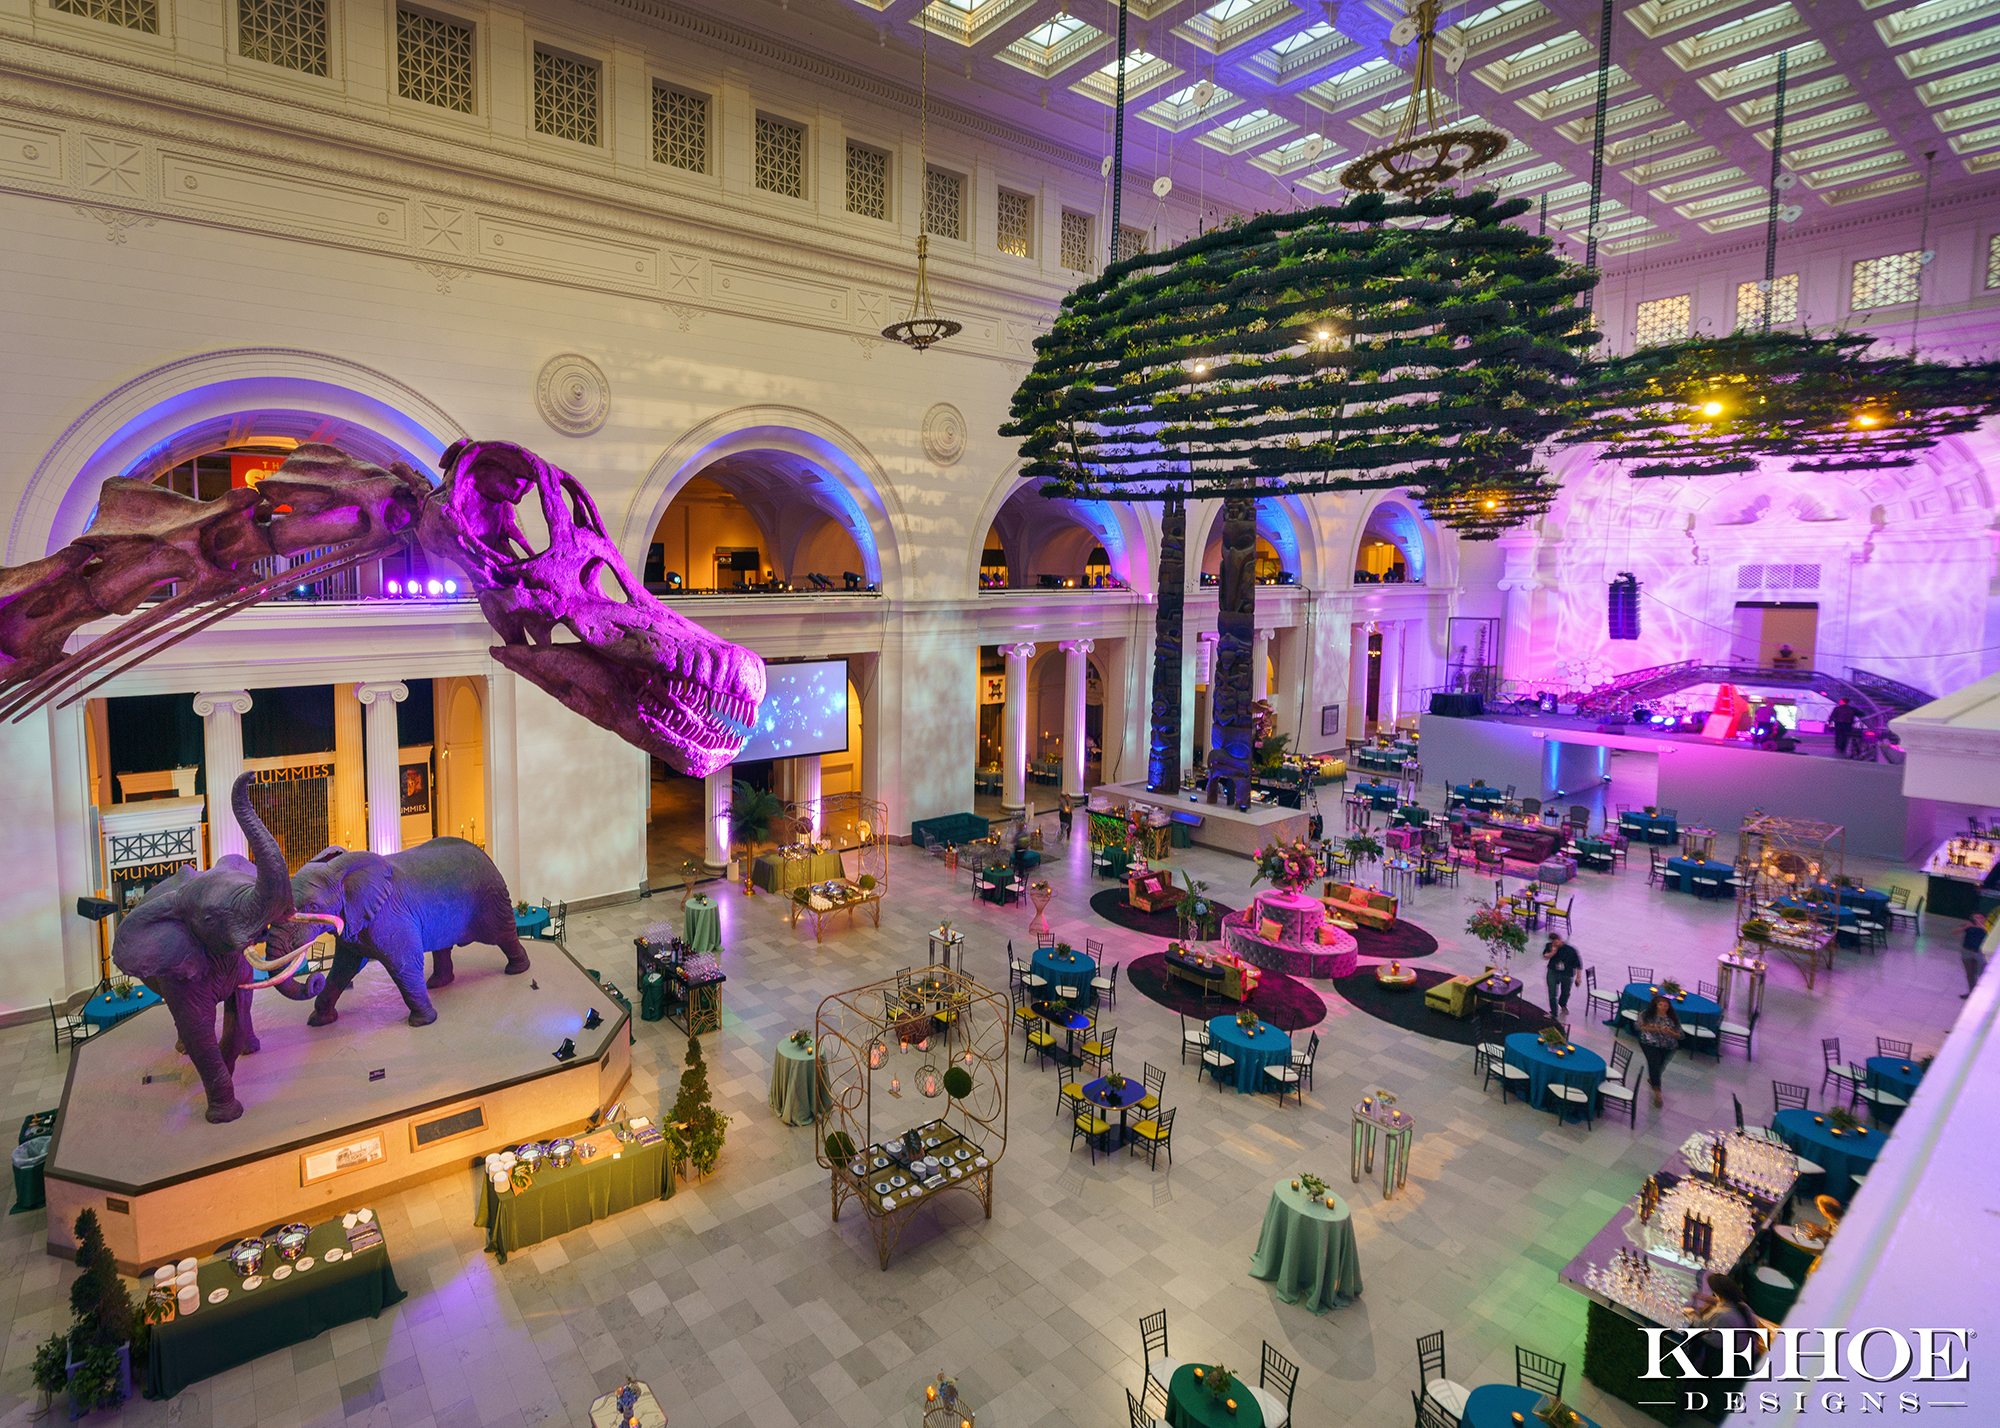 A view of a large museum hall arranged for a special event, seen from the second floor balcony. A dinosaur fossil head can be seen to the left, hanging gardens to the right.